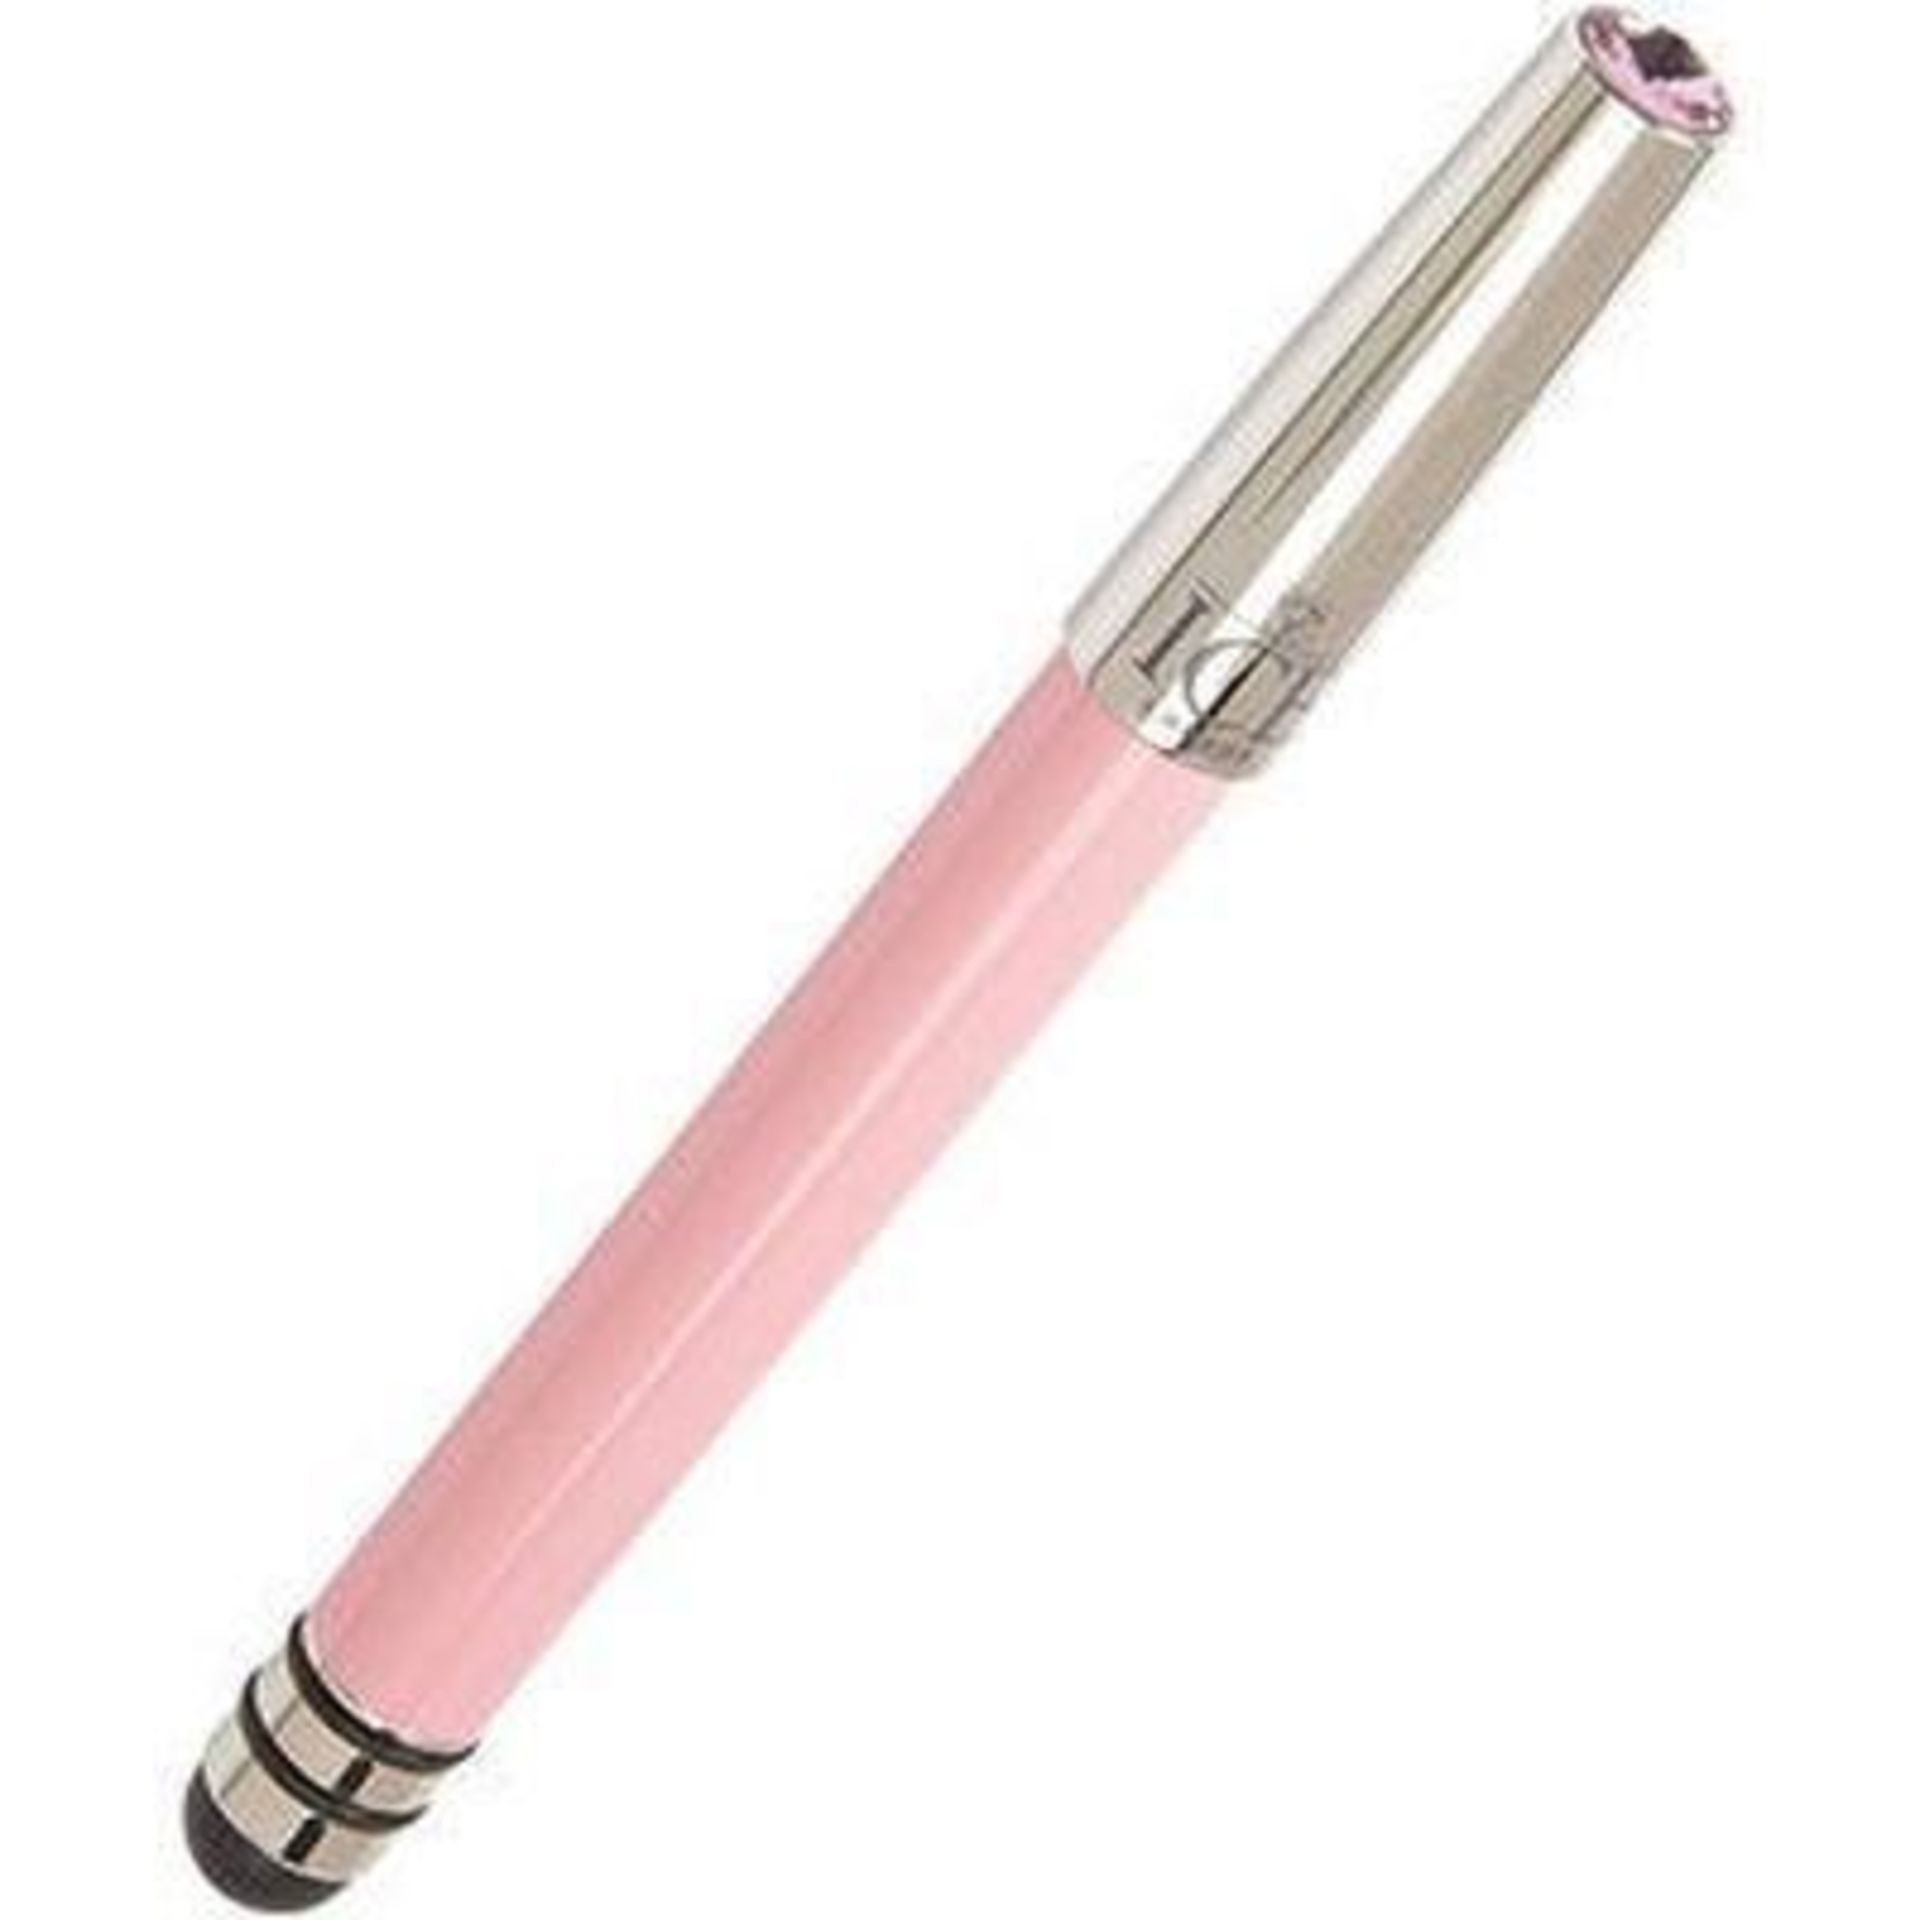 50 x ICE LONDON App Pen Duo - Touch Stylus And Ink Pen Combined - Colour: LIGHT PINK - MADE WITH - Image 5 of 6